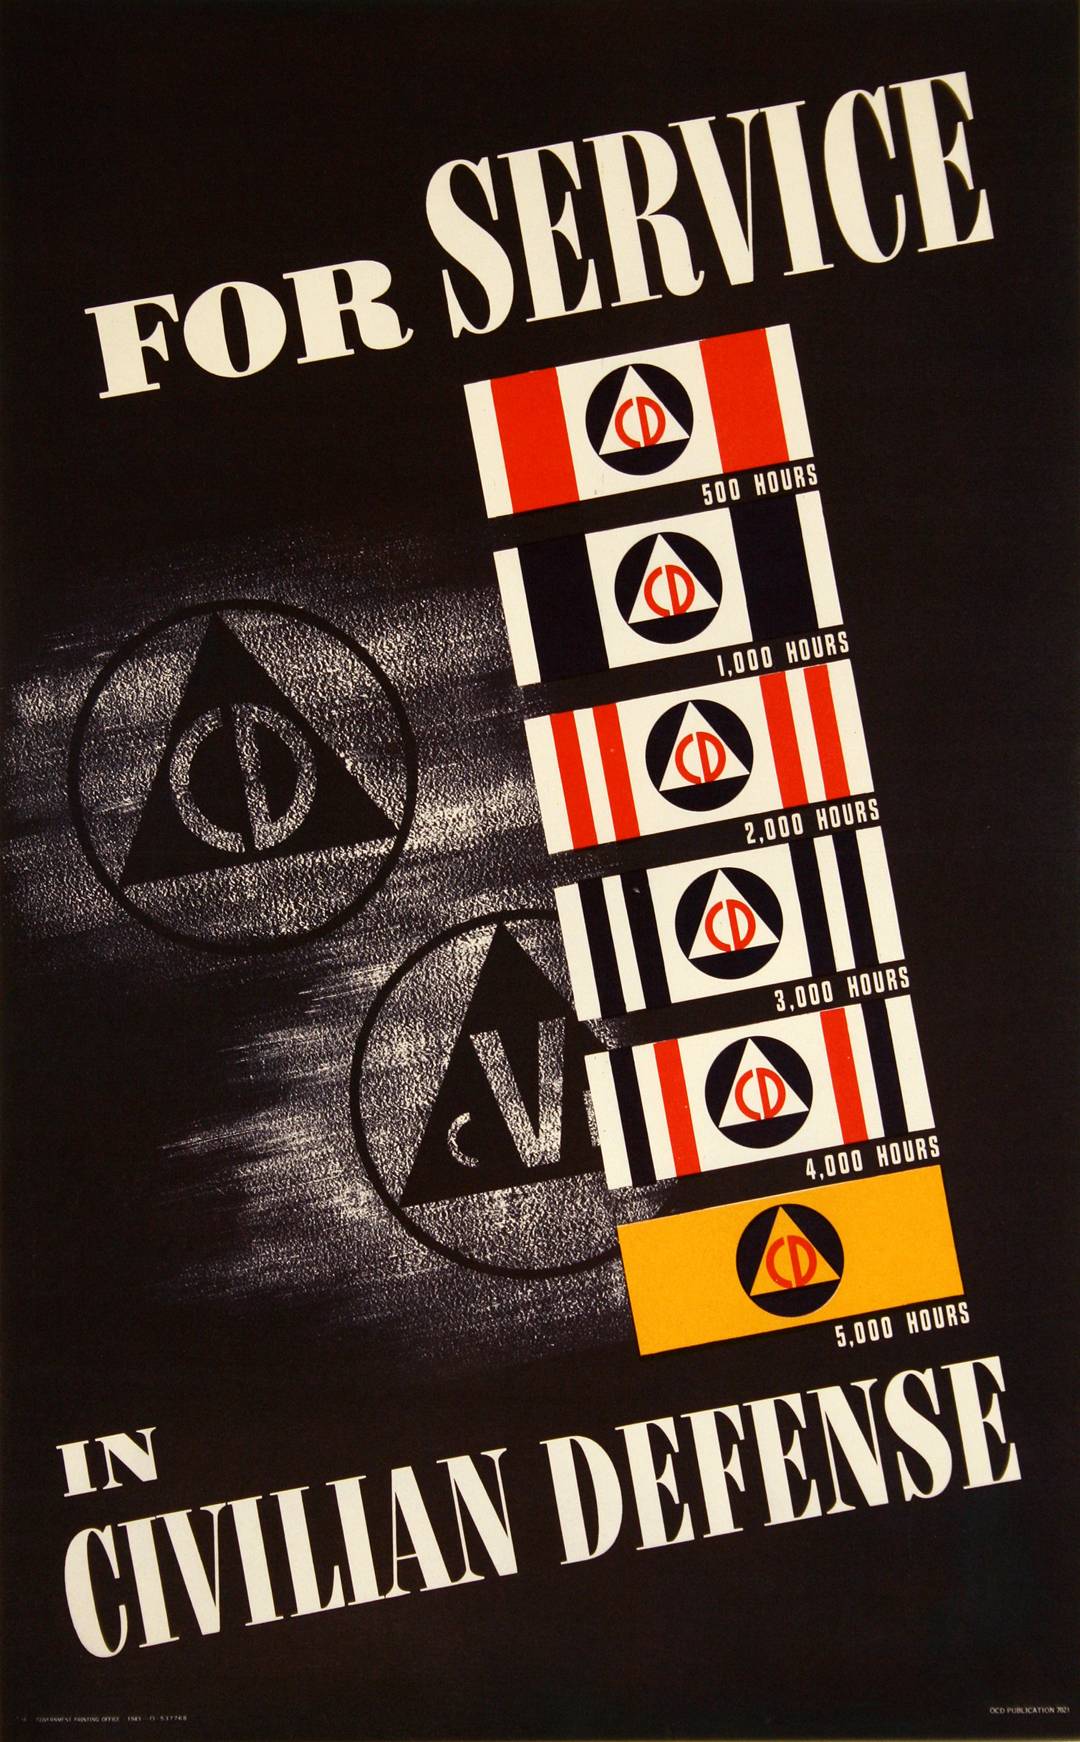 Original WWII Poster by Bates - For Service in Civilian Defense